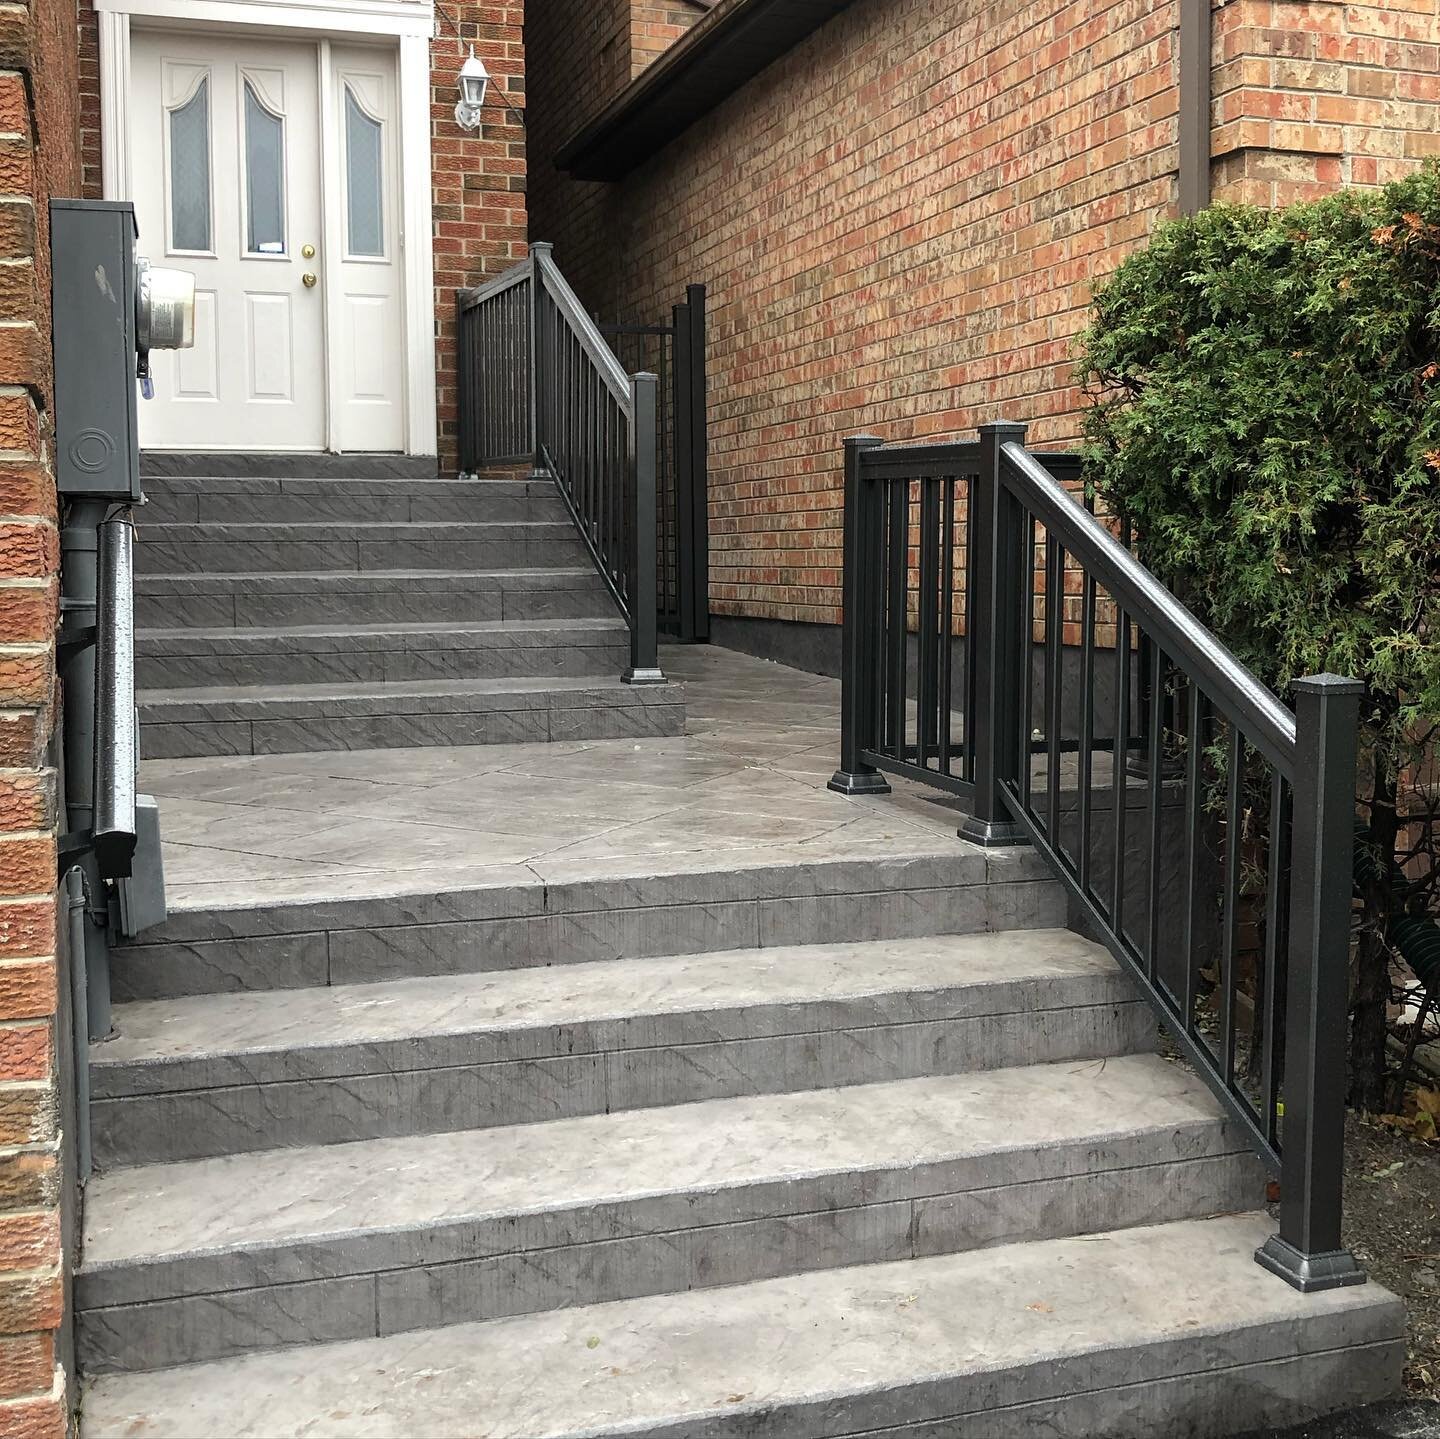 Thanks @splendaconcretedesign for the new porch and walk way. We took care of the railing and gate for this home in Thornhill 💪🏼 #construction
&bull;
&bull;
 #architecture #design #building #glassrailing #renovation #engineering #contractor #home #